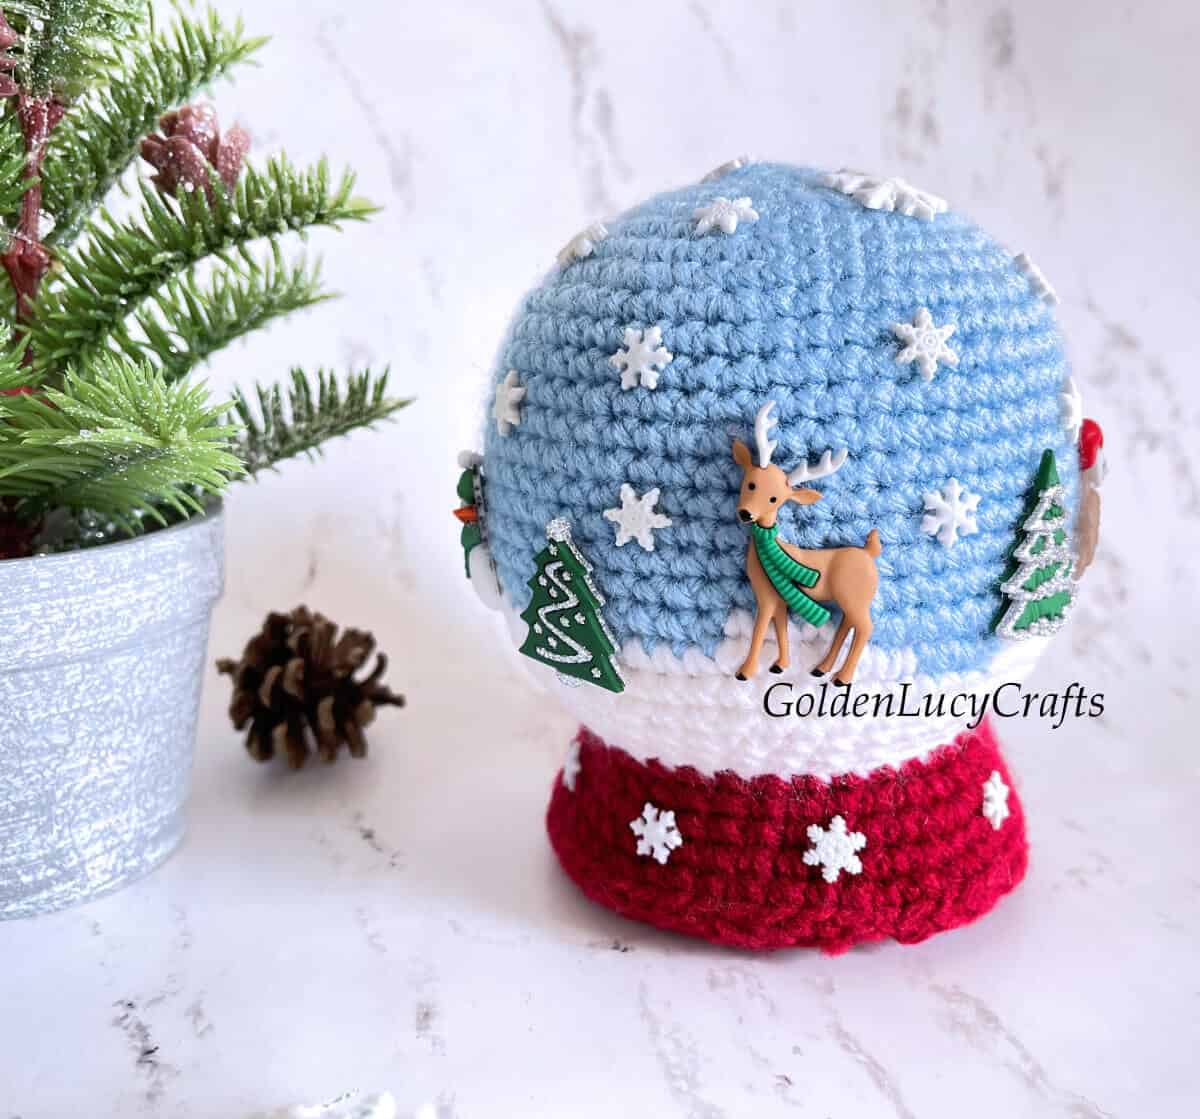 Crocheted snowglobe toy embellished with winter-themed buttons.